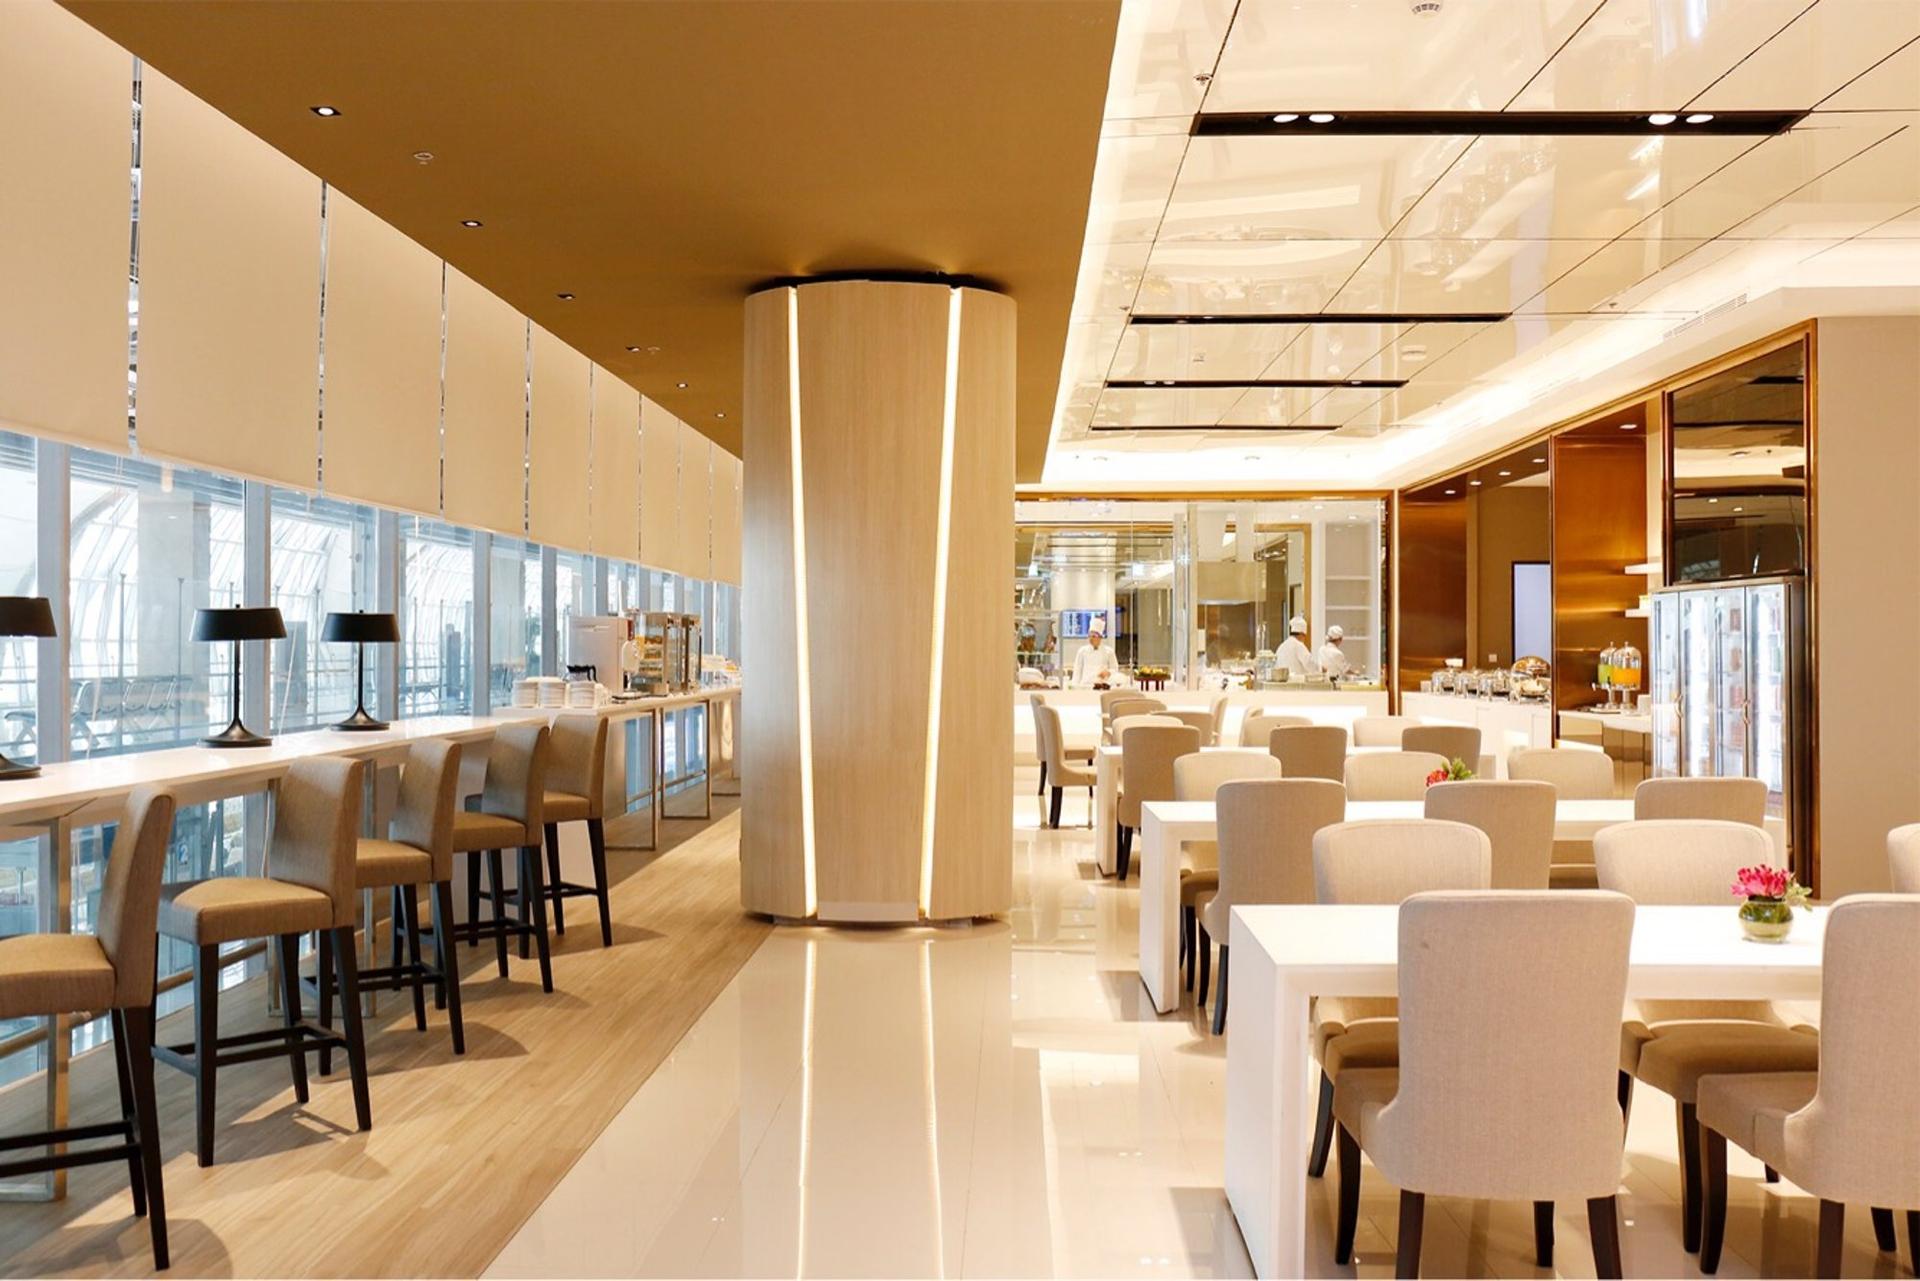 Miracle Business Class Lounge image 6 of 12